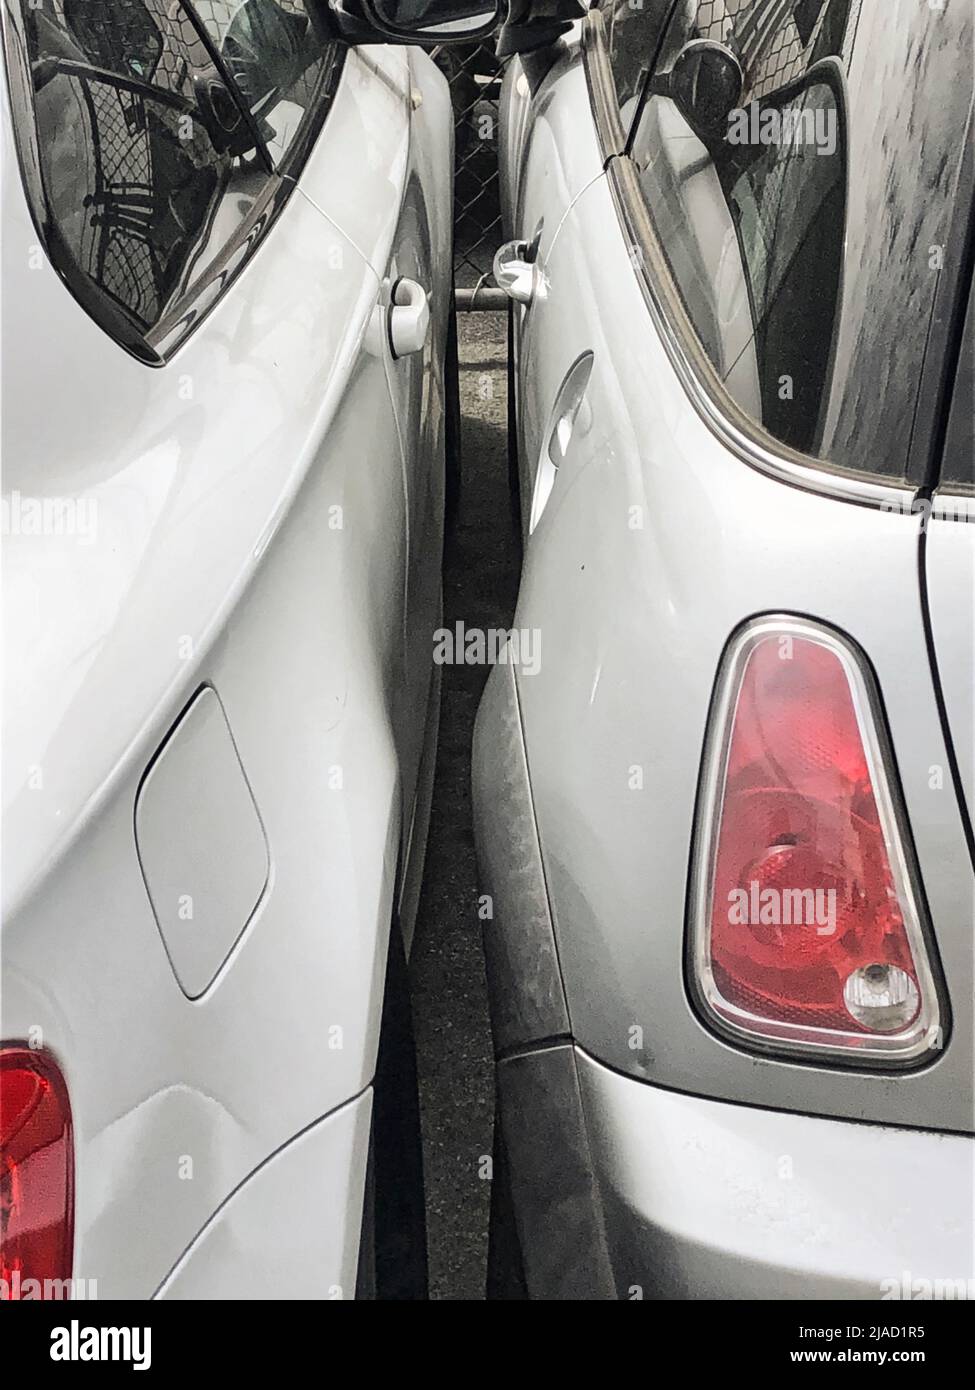 Outside an auto / car repair garage, two cars have been squeezed together with little chance of passengers or drivers exiting their vehicles. Stock Photo